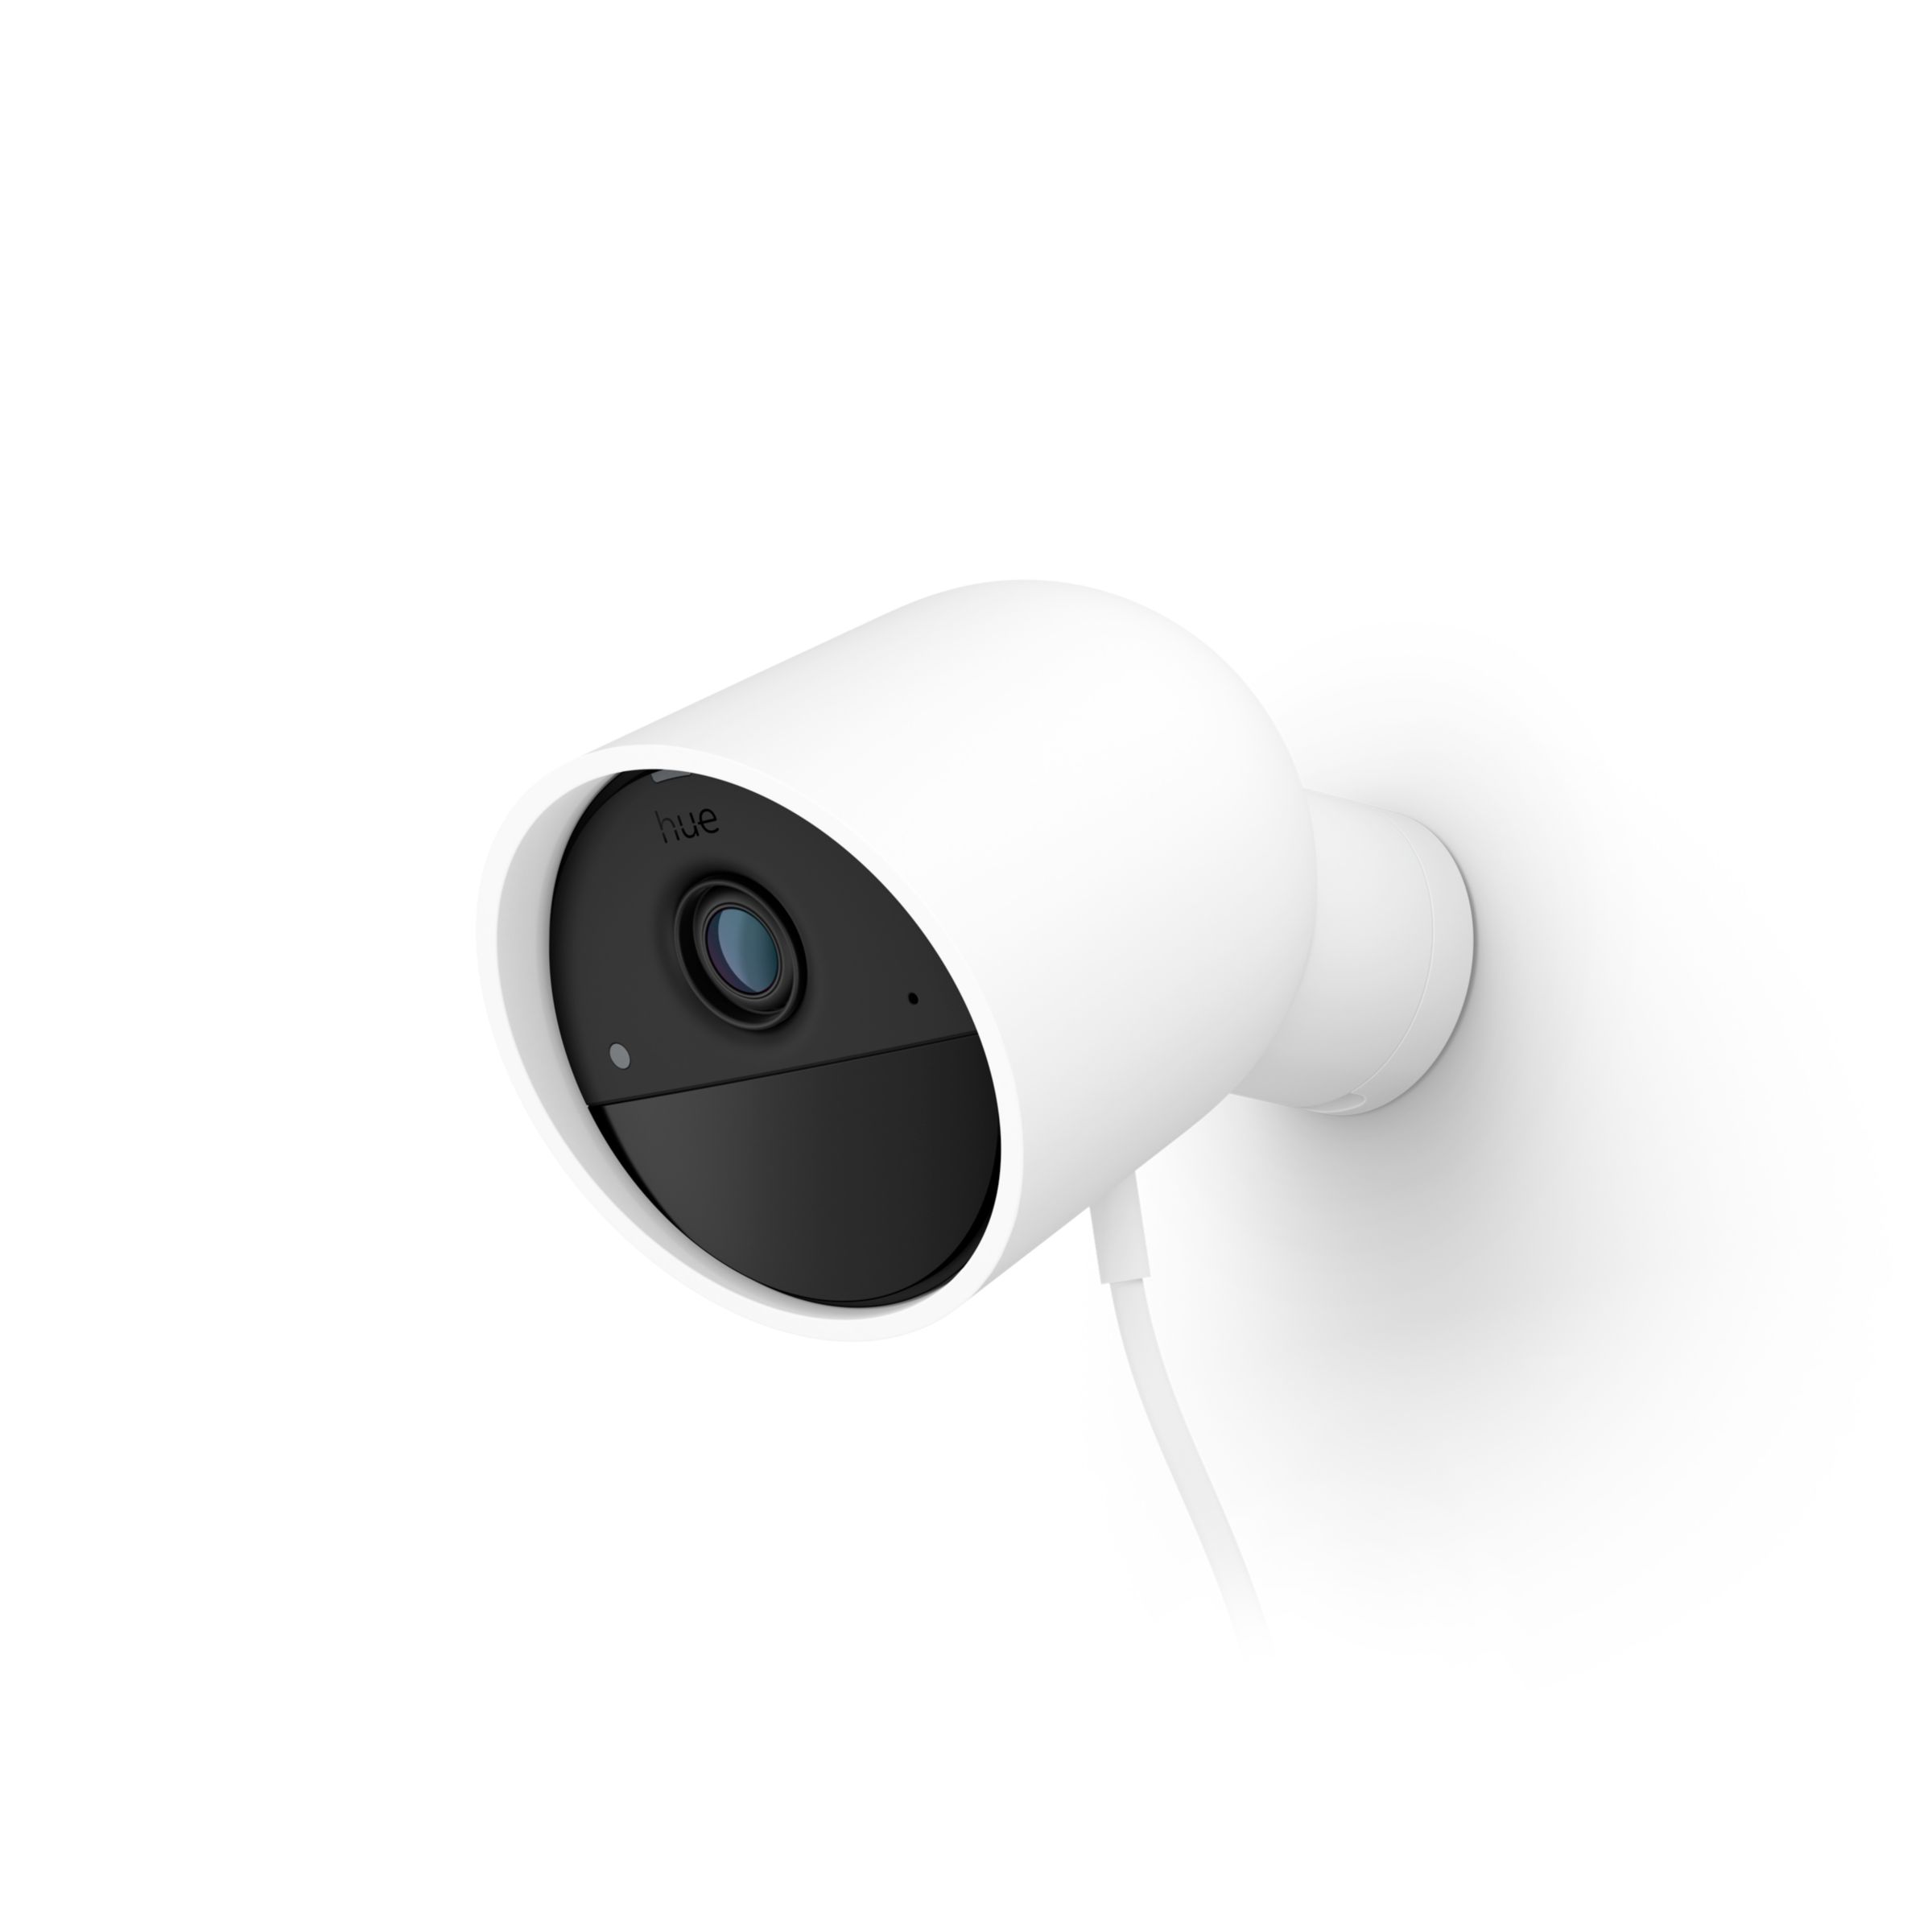 Hue Secure Wired Camera | Philips Hue US